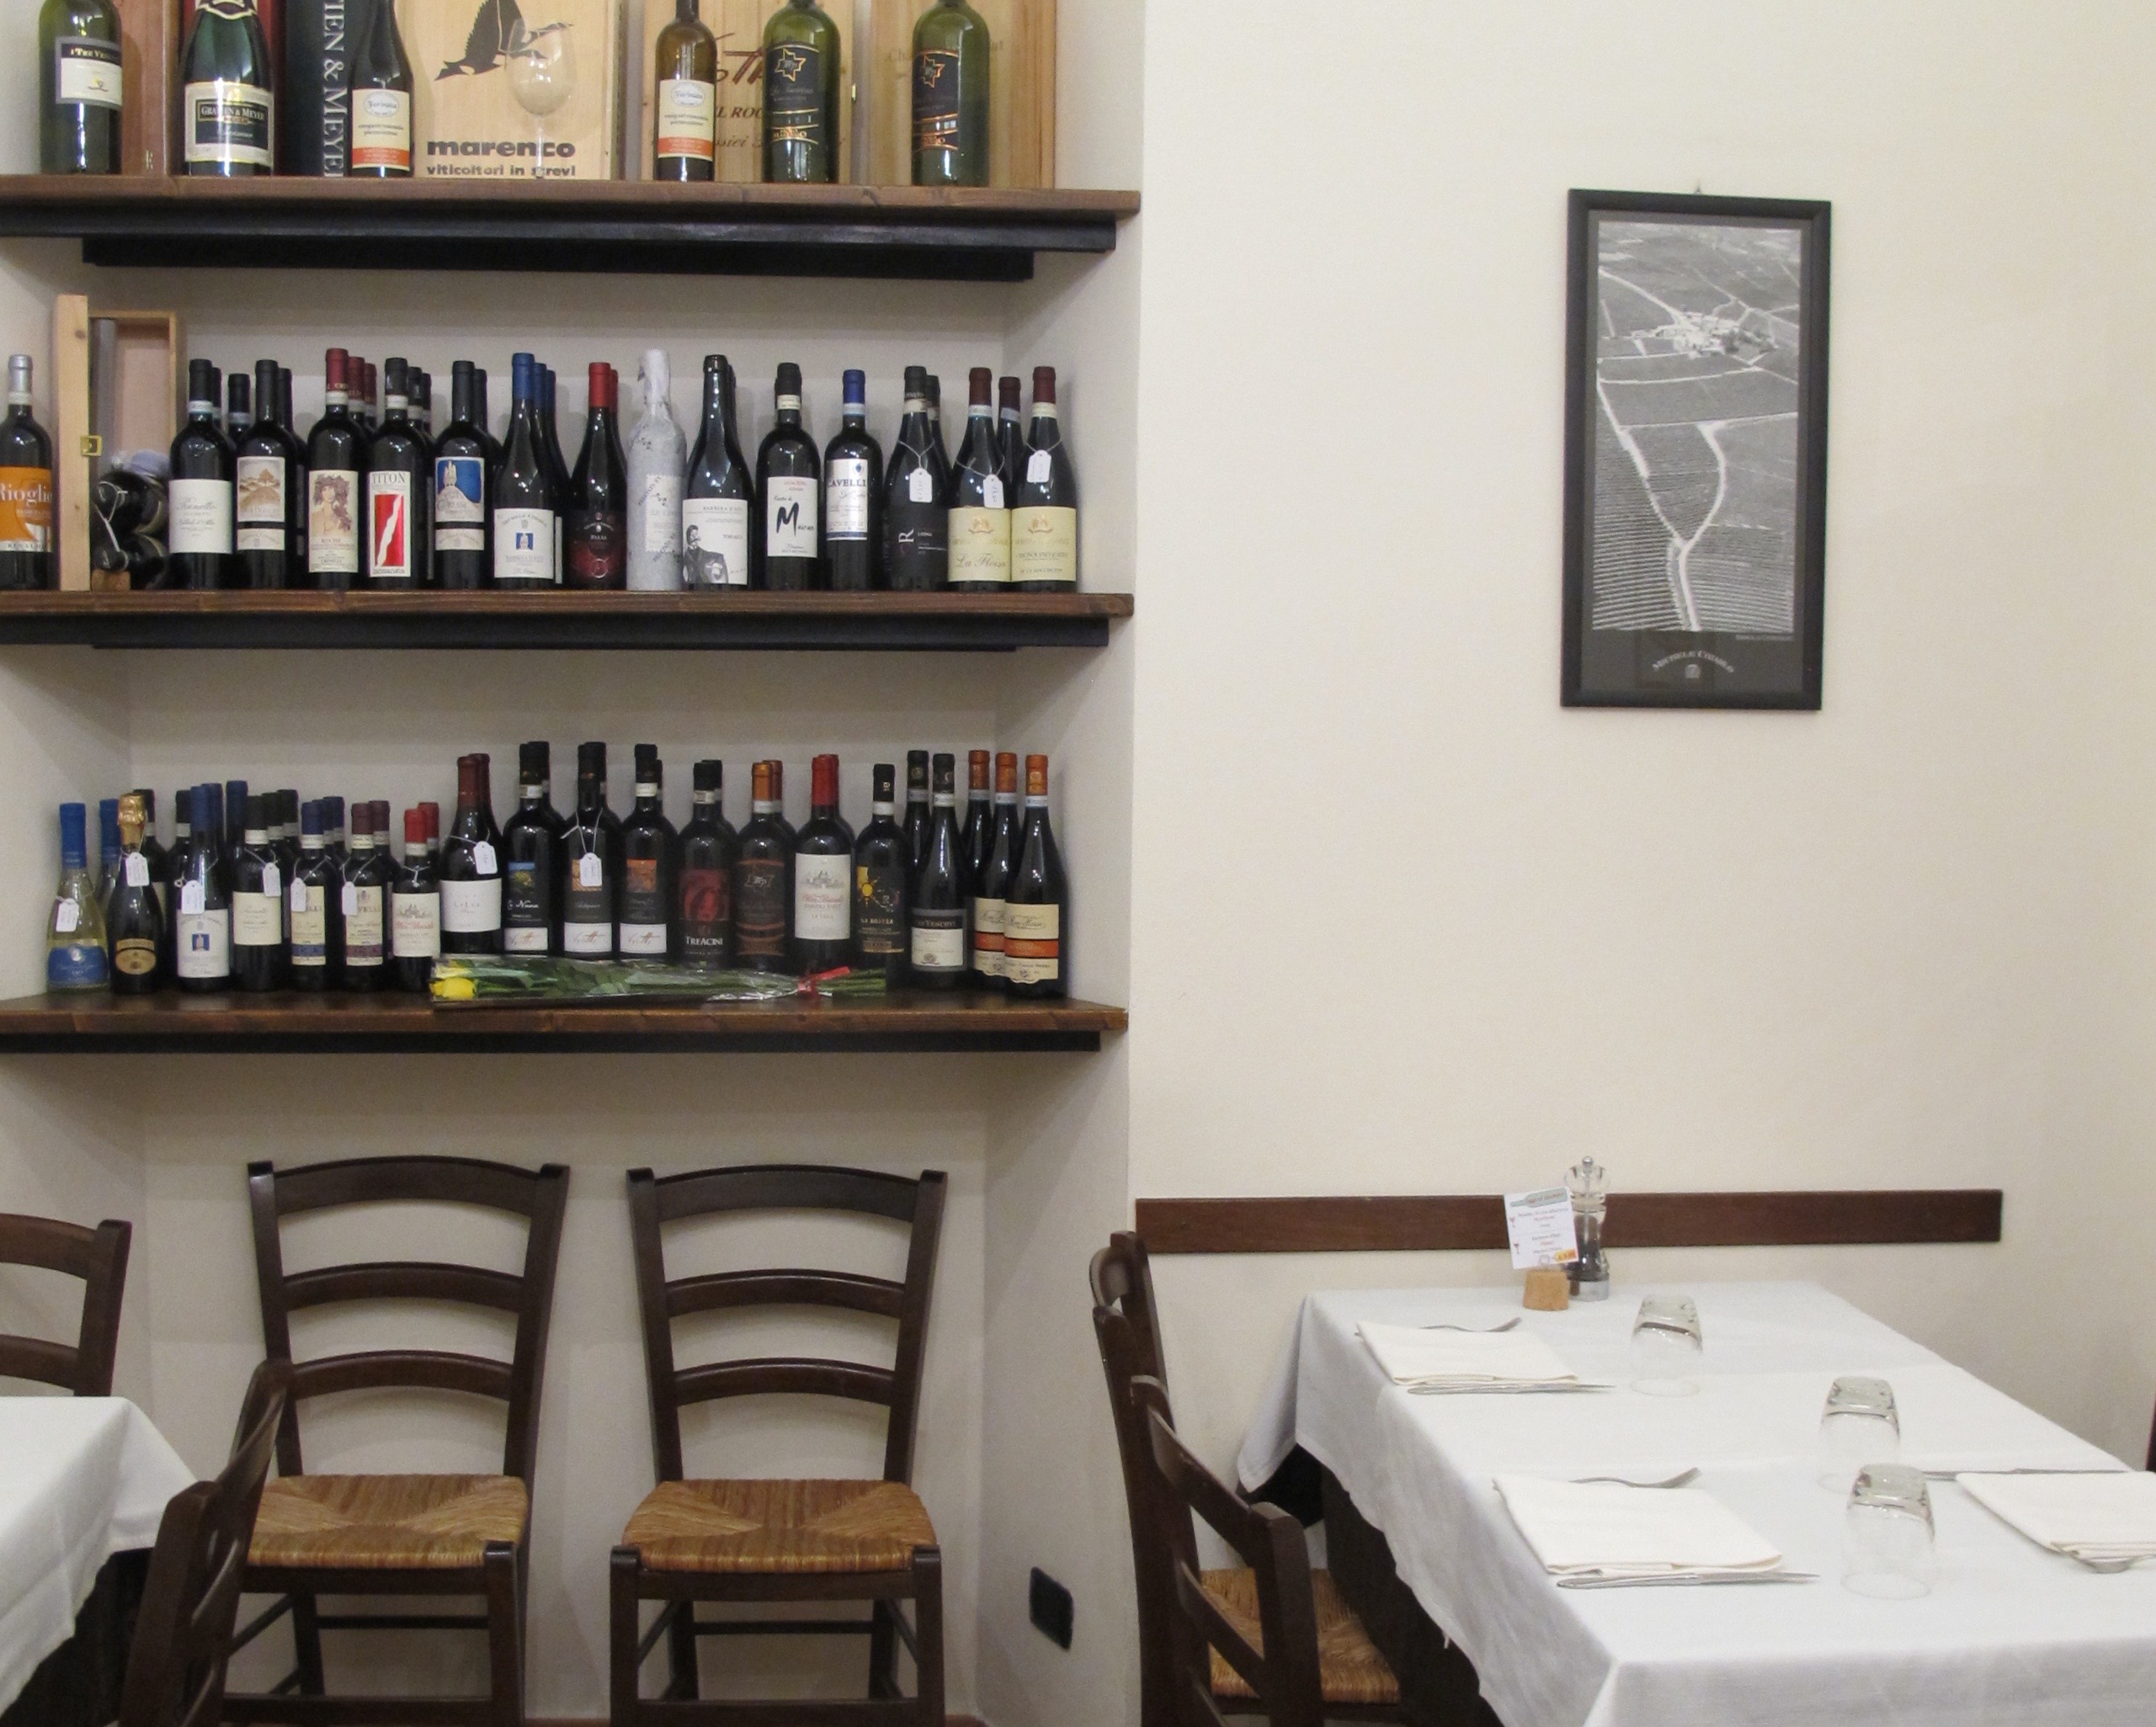 A few wine selections at Trattoria Mazzini. Photos by Marla Norman.